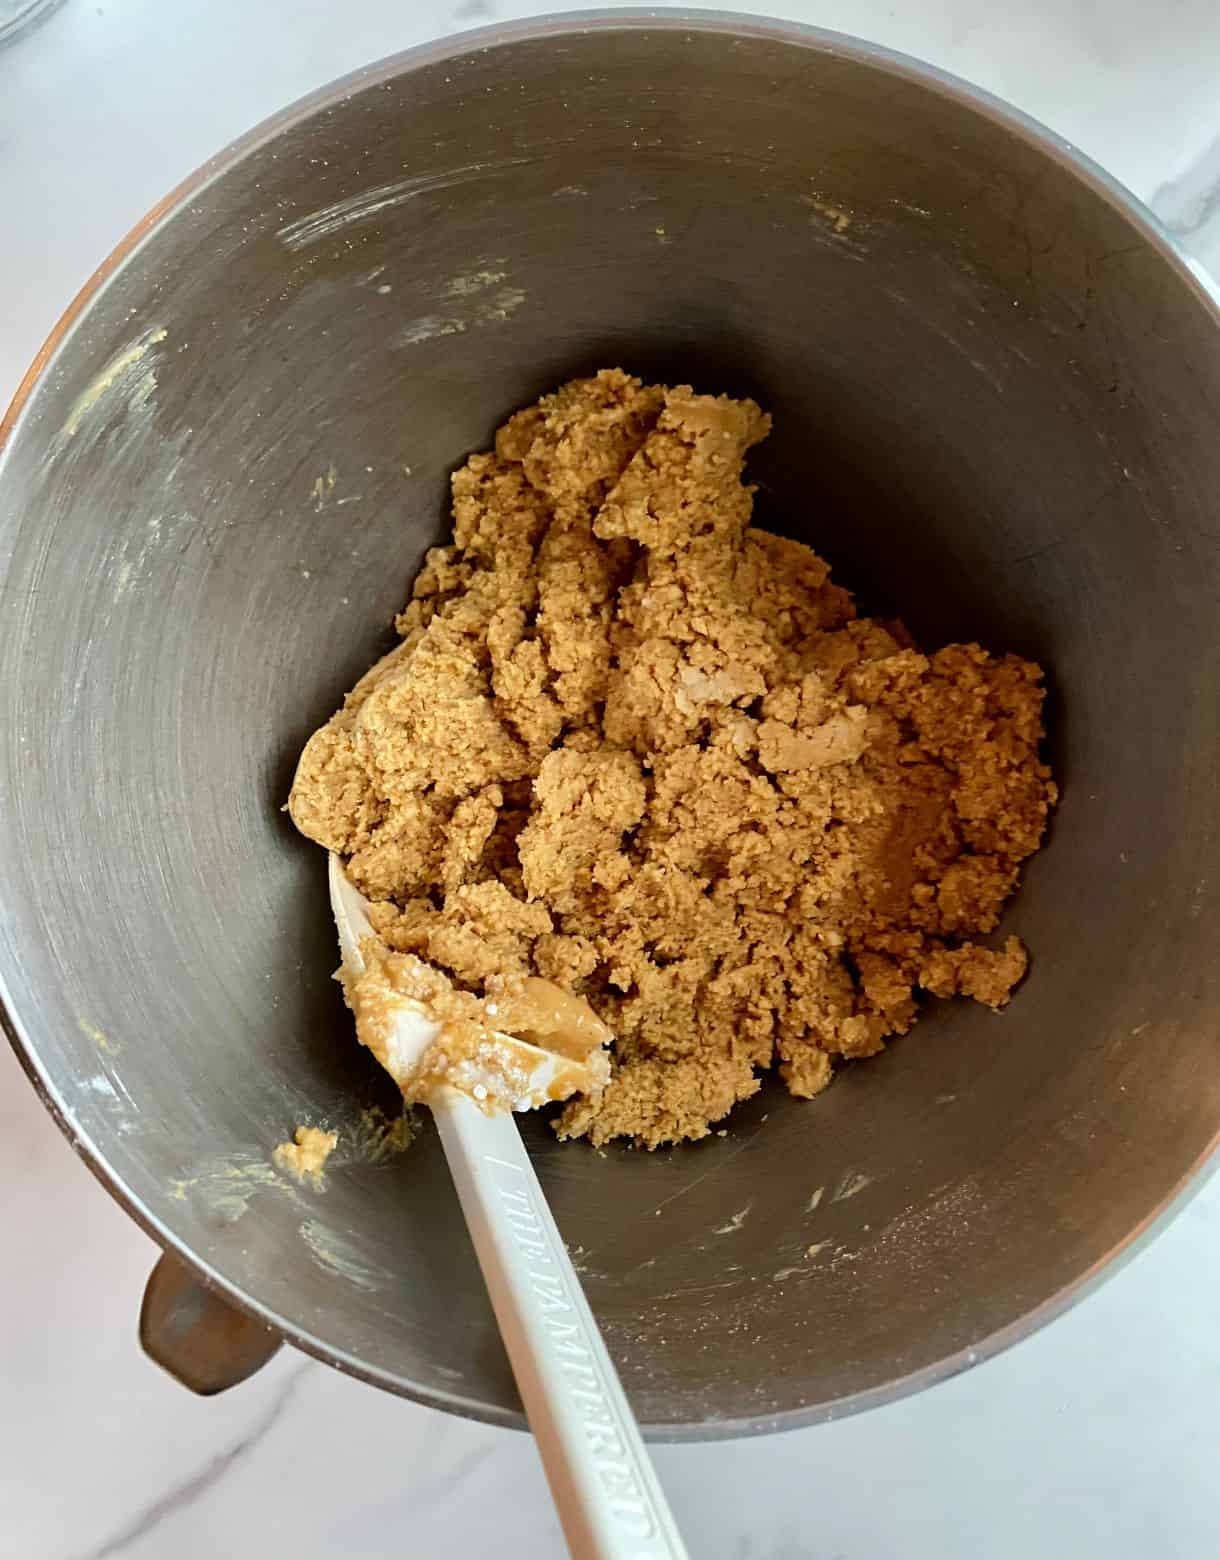 A mixing bowl with peanut butter doug for No-Bake Chocolate Peanut Butter Bars.